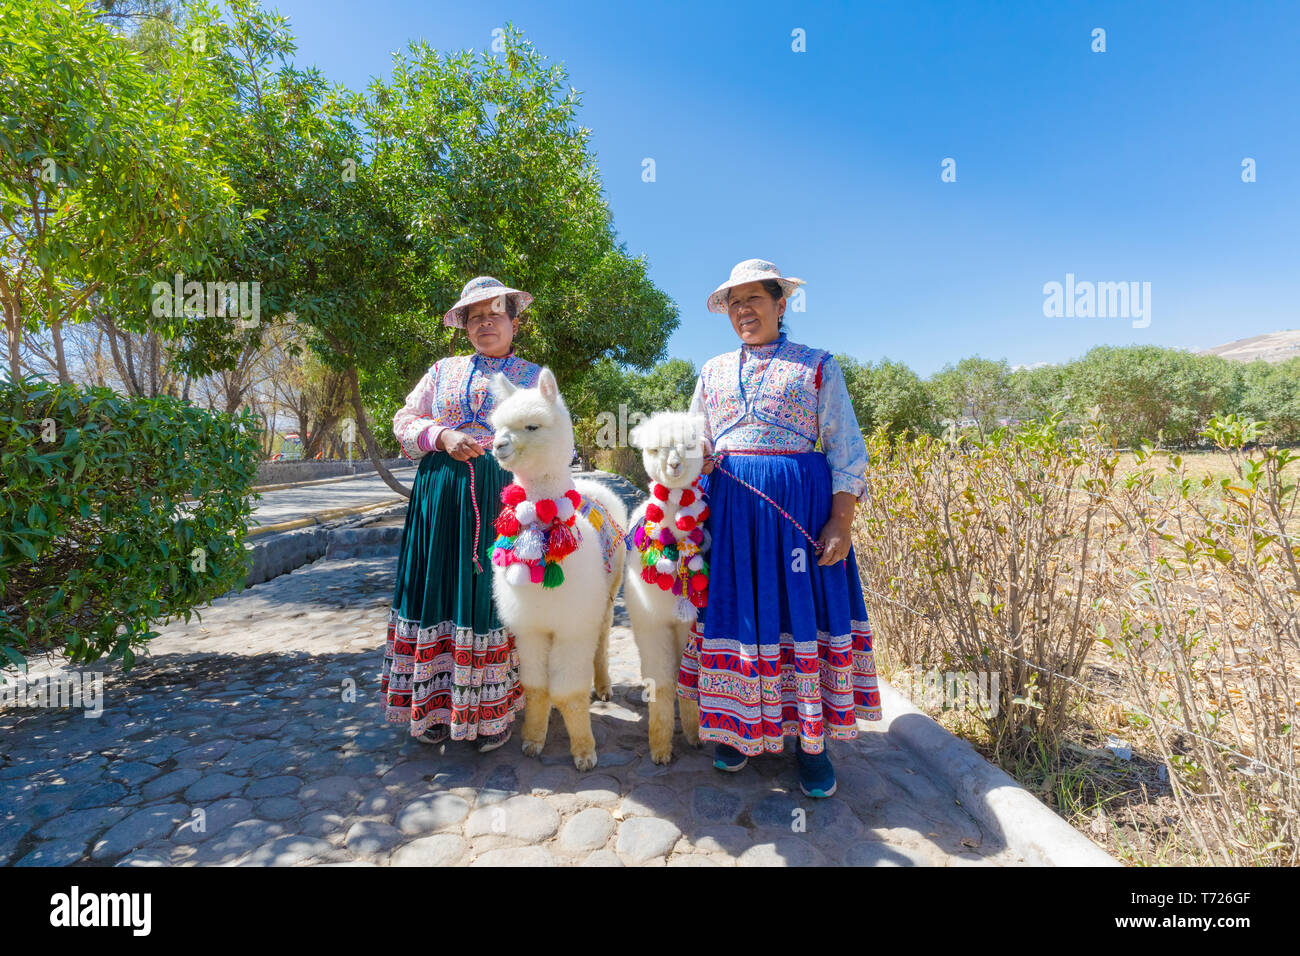 women in traditional clothes and alpaca Huacaya Arequipa Peru Stock Photo